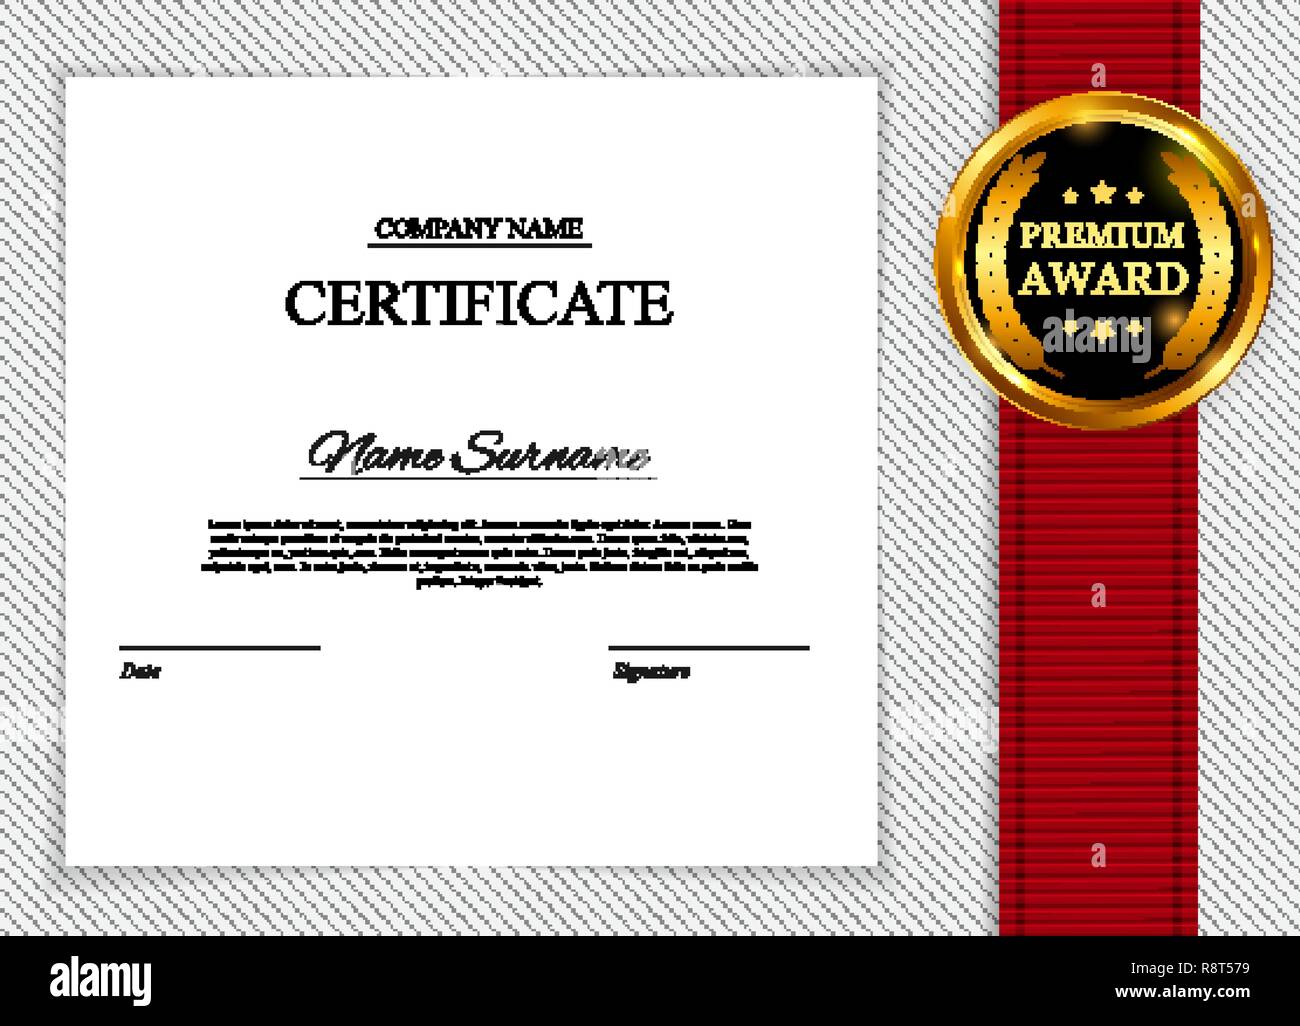 Certificate Template Blank from c8.alamy.com